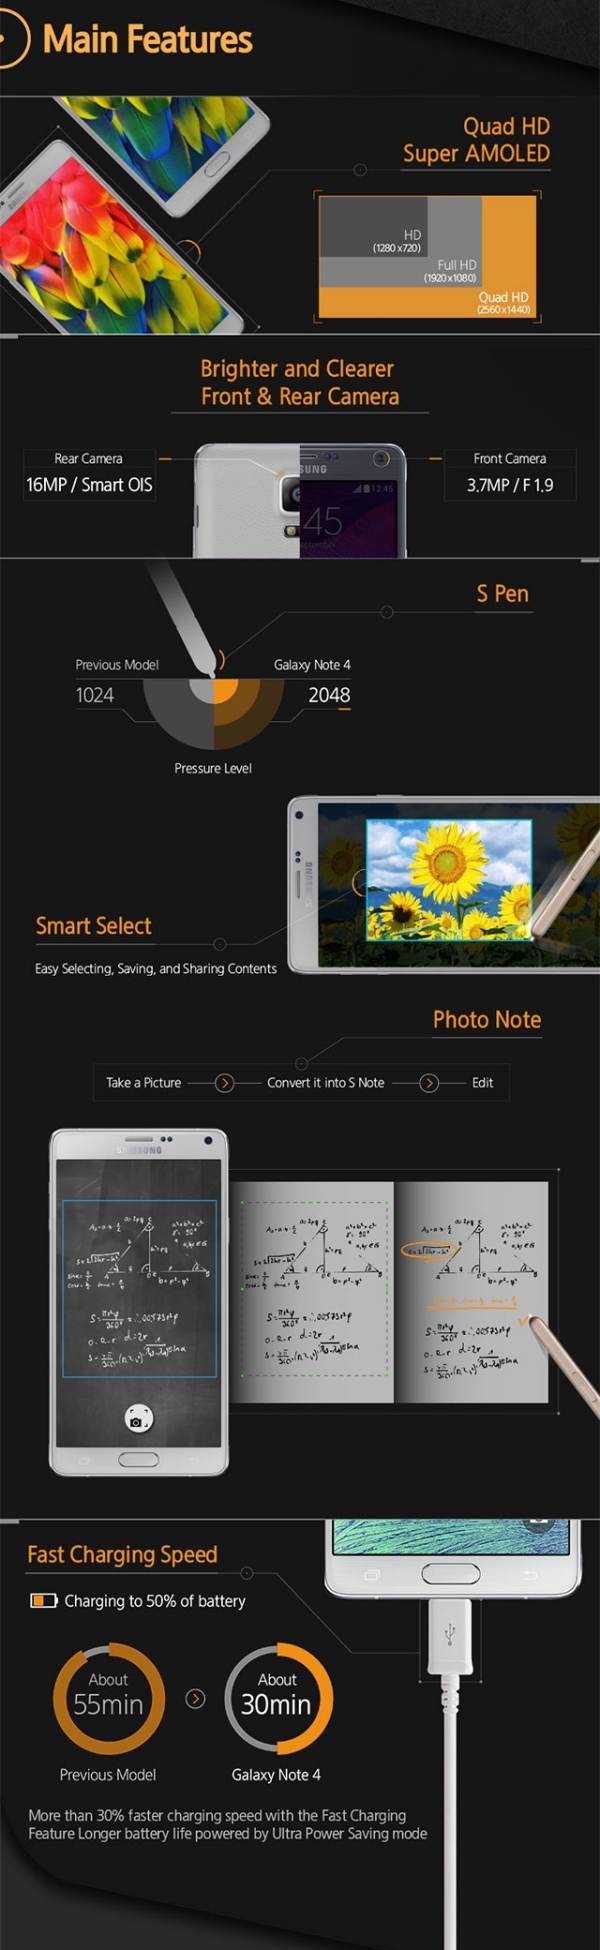 Galaxy Note 4 Features and Specifications Infographic 2